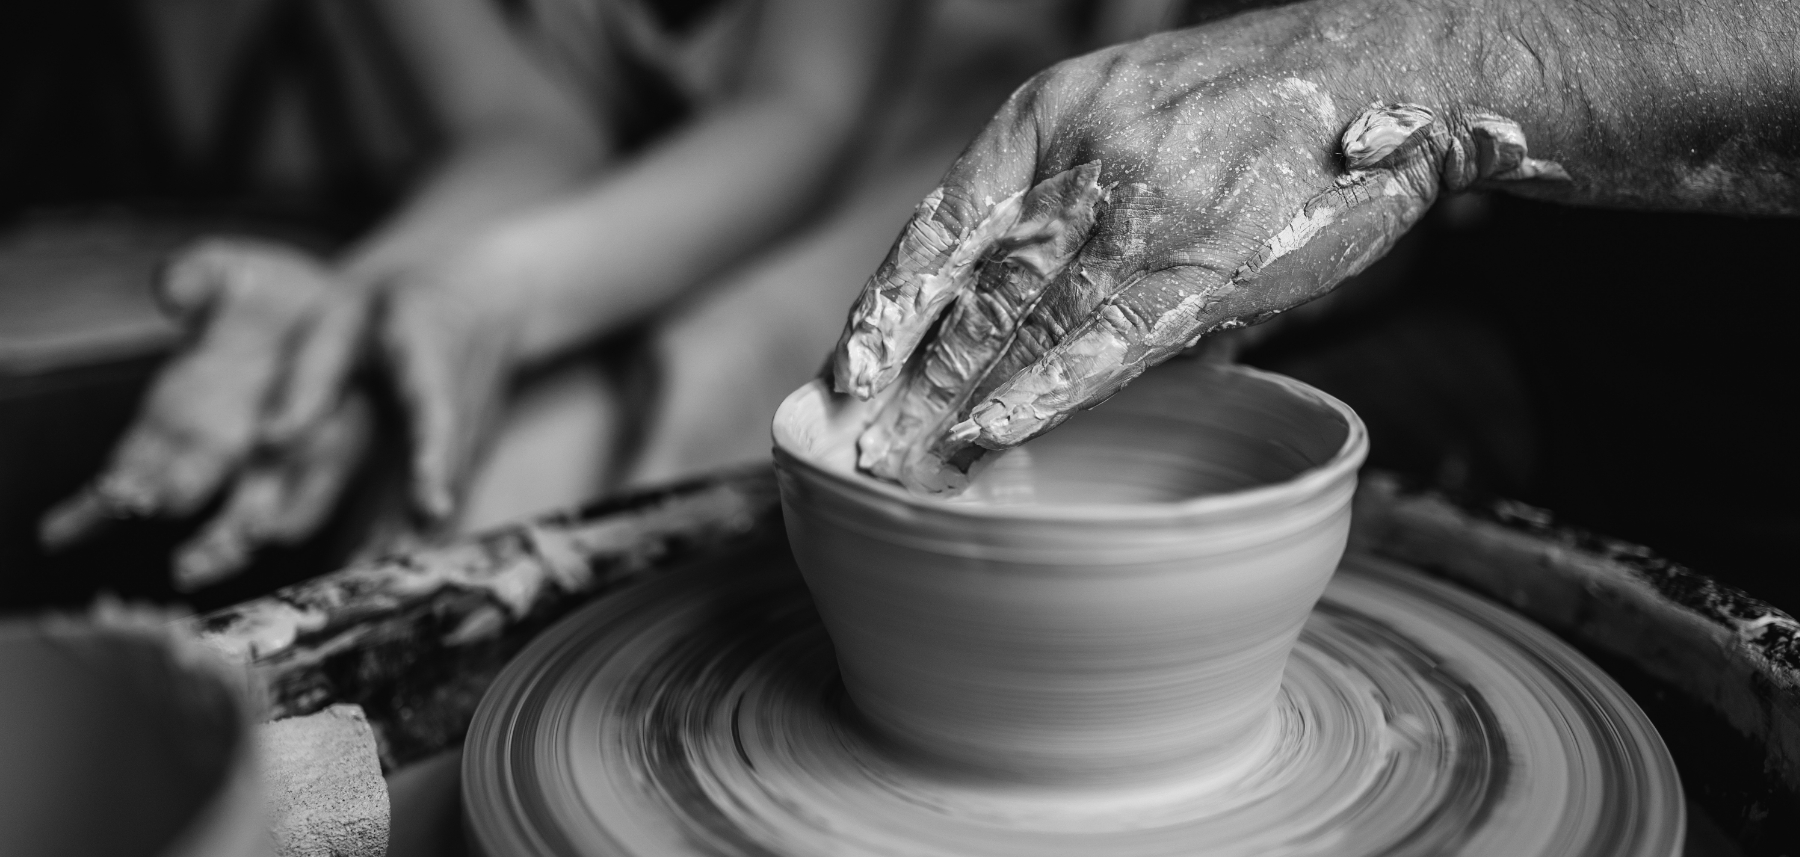 A black and white photo of a person working on a potter's wheel.